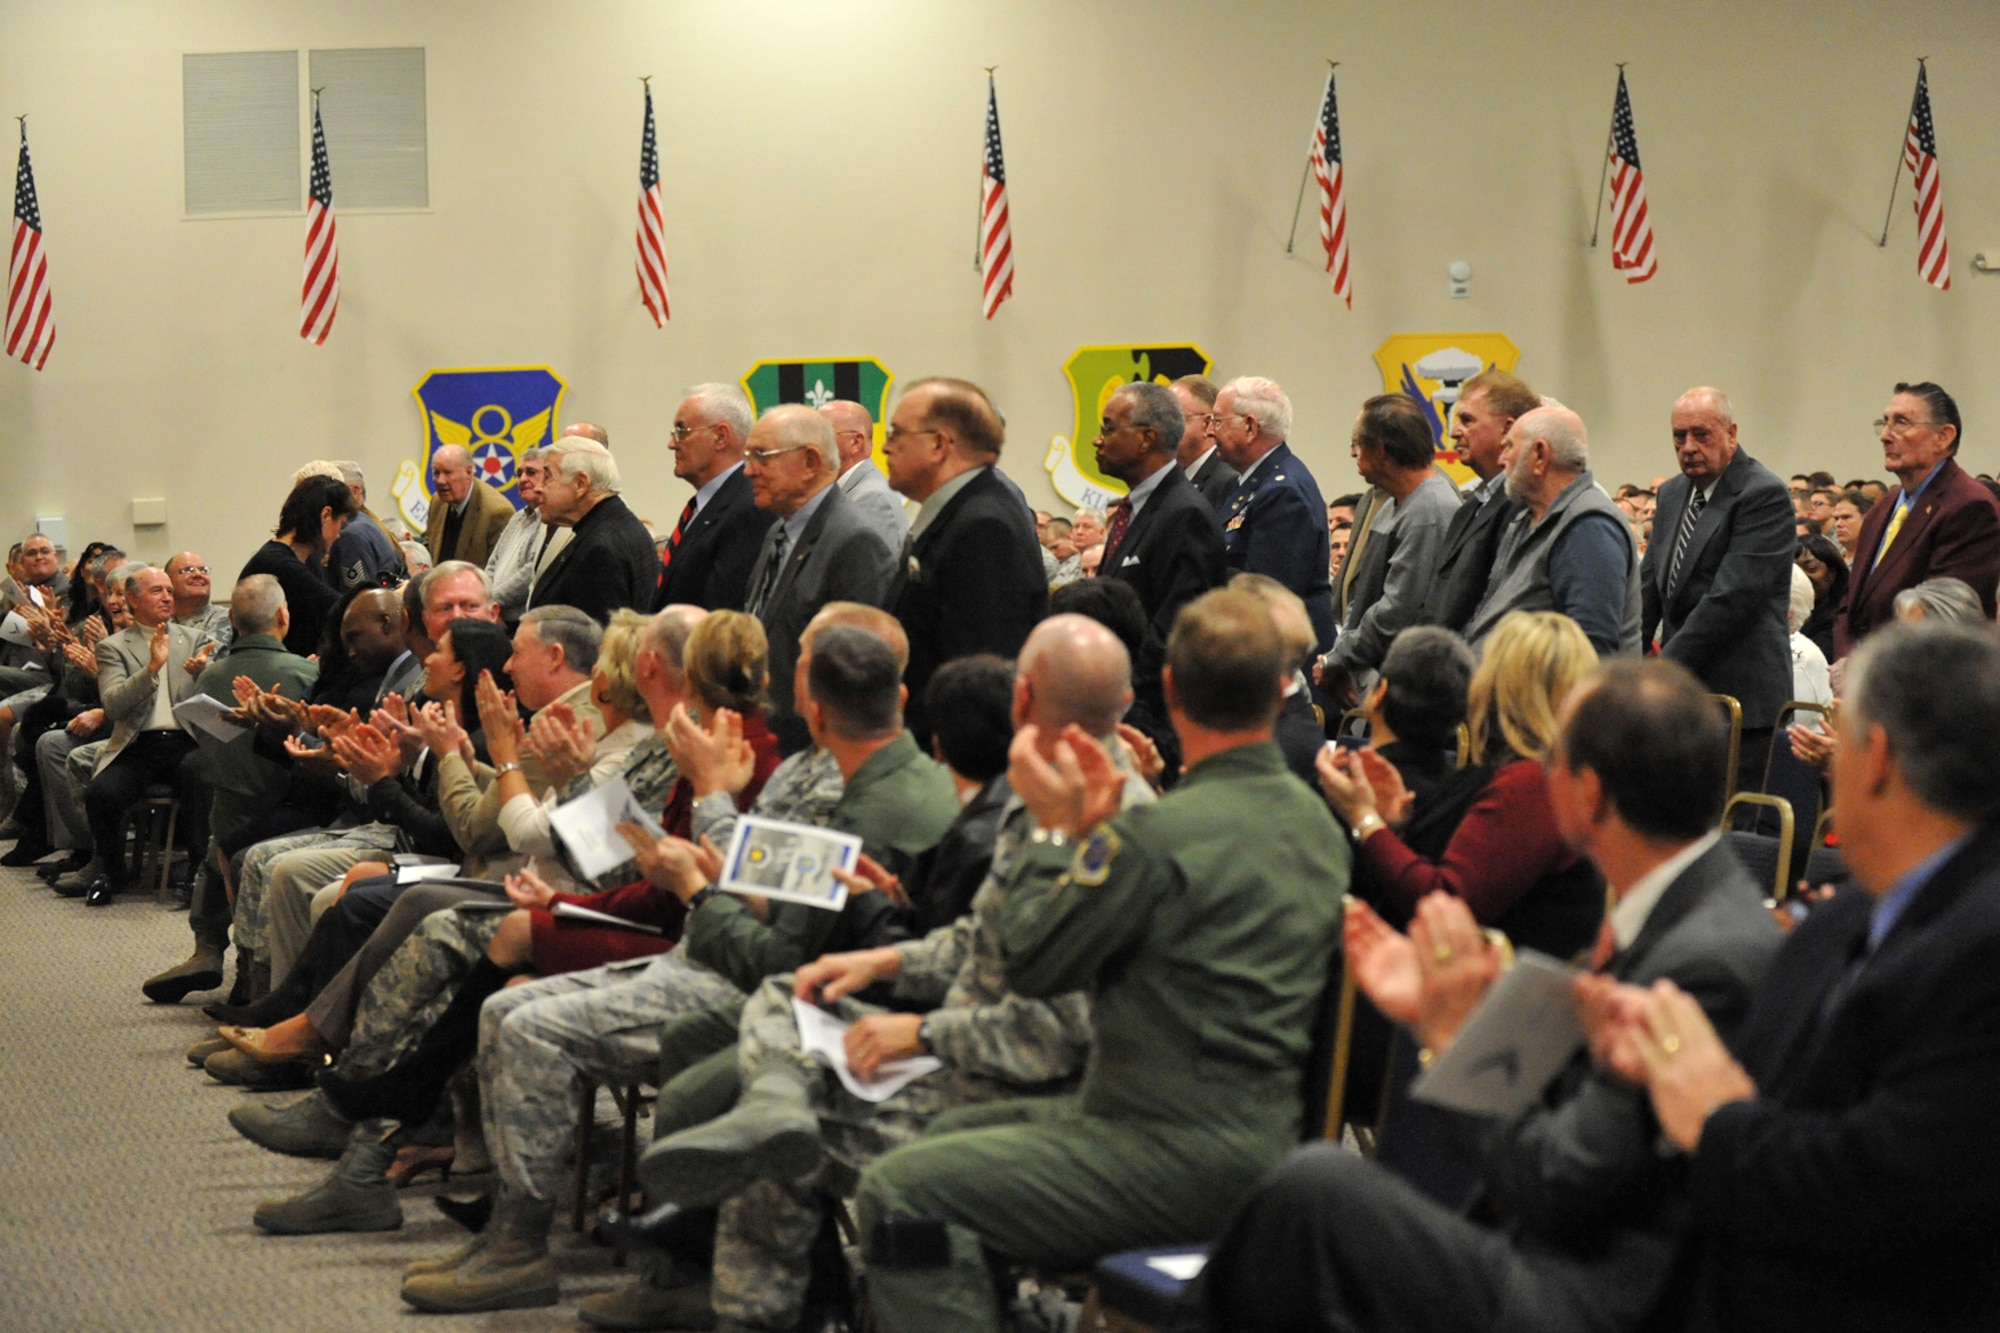 Approximately 40 307th Bomb Wing alumni from World War II, the Korean War, Vietnam and the Cold War era are recognized during reactivation ceremonies for the 307th Bomb Wing in Hoban Hall at Barksdale Air Force Base, La., Jan. 8, 2011. During the same ceremonies, the 917th Operations Group was re-designated as the 917th Fighter Group and the 917th Wing was deactivated. (U.S. Air Force photo/Staff Sgt. Travis Robertson)